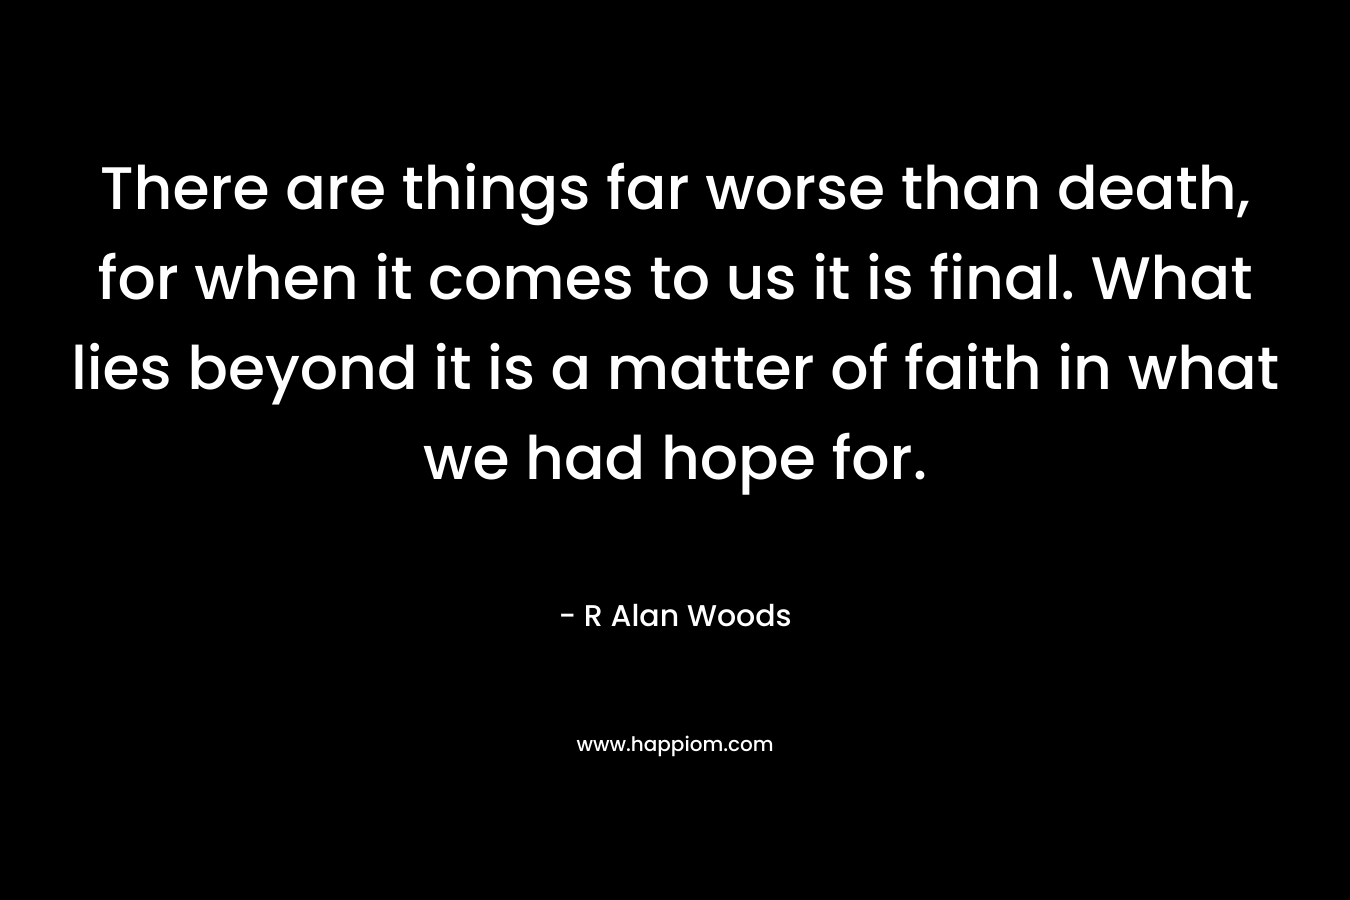 There are things far worse than death, for when it comes to us it is final. What lies beyond it is a matter of faith in what we had hope for. – R Alan Woods